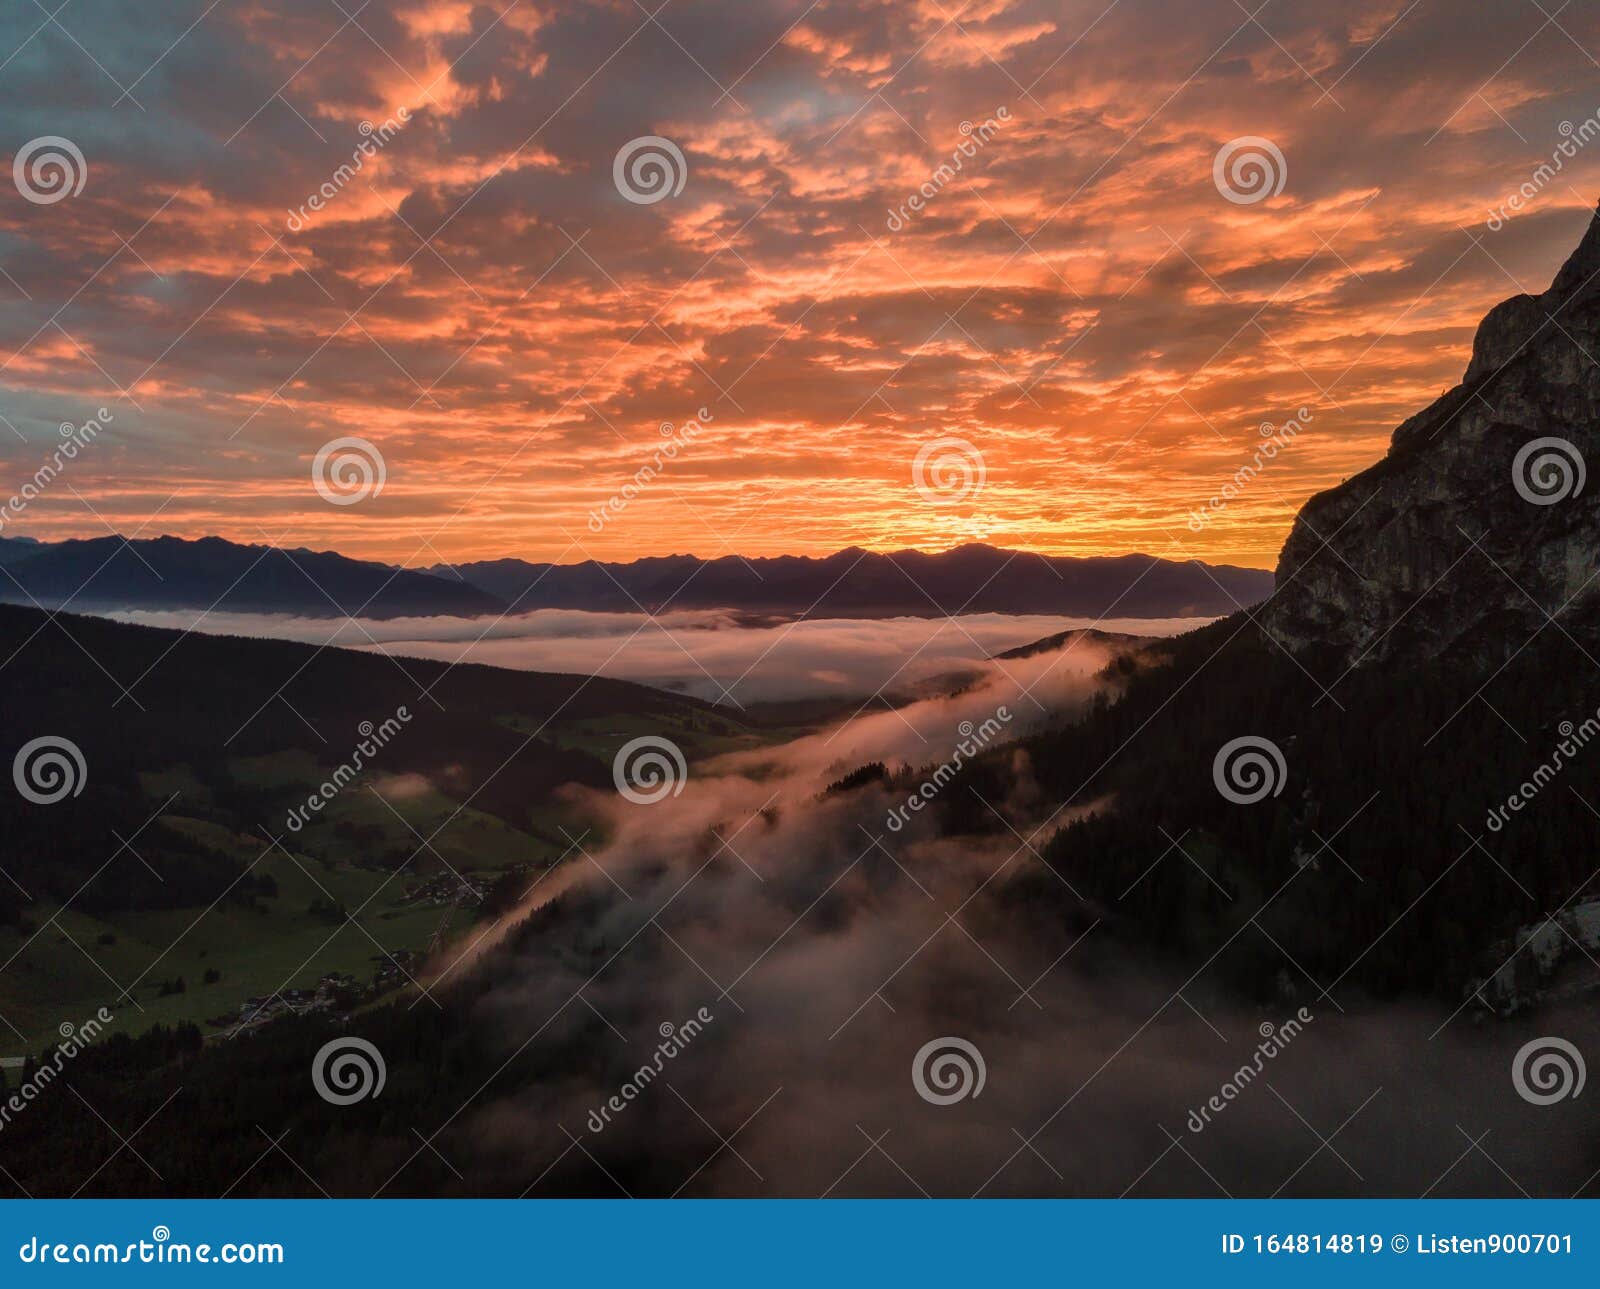 Aerial View Of The Sunrise From The Mountain In Dolomites Italy Drone View With Morning Glow And Mist In The Valley Stock Image Image Of Dramatic Aerial